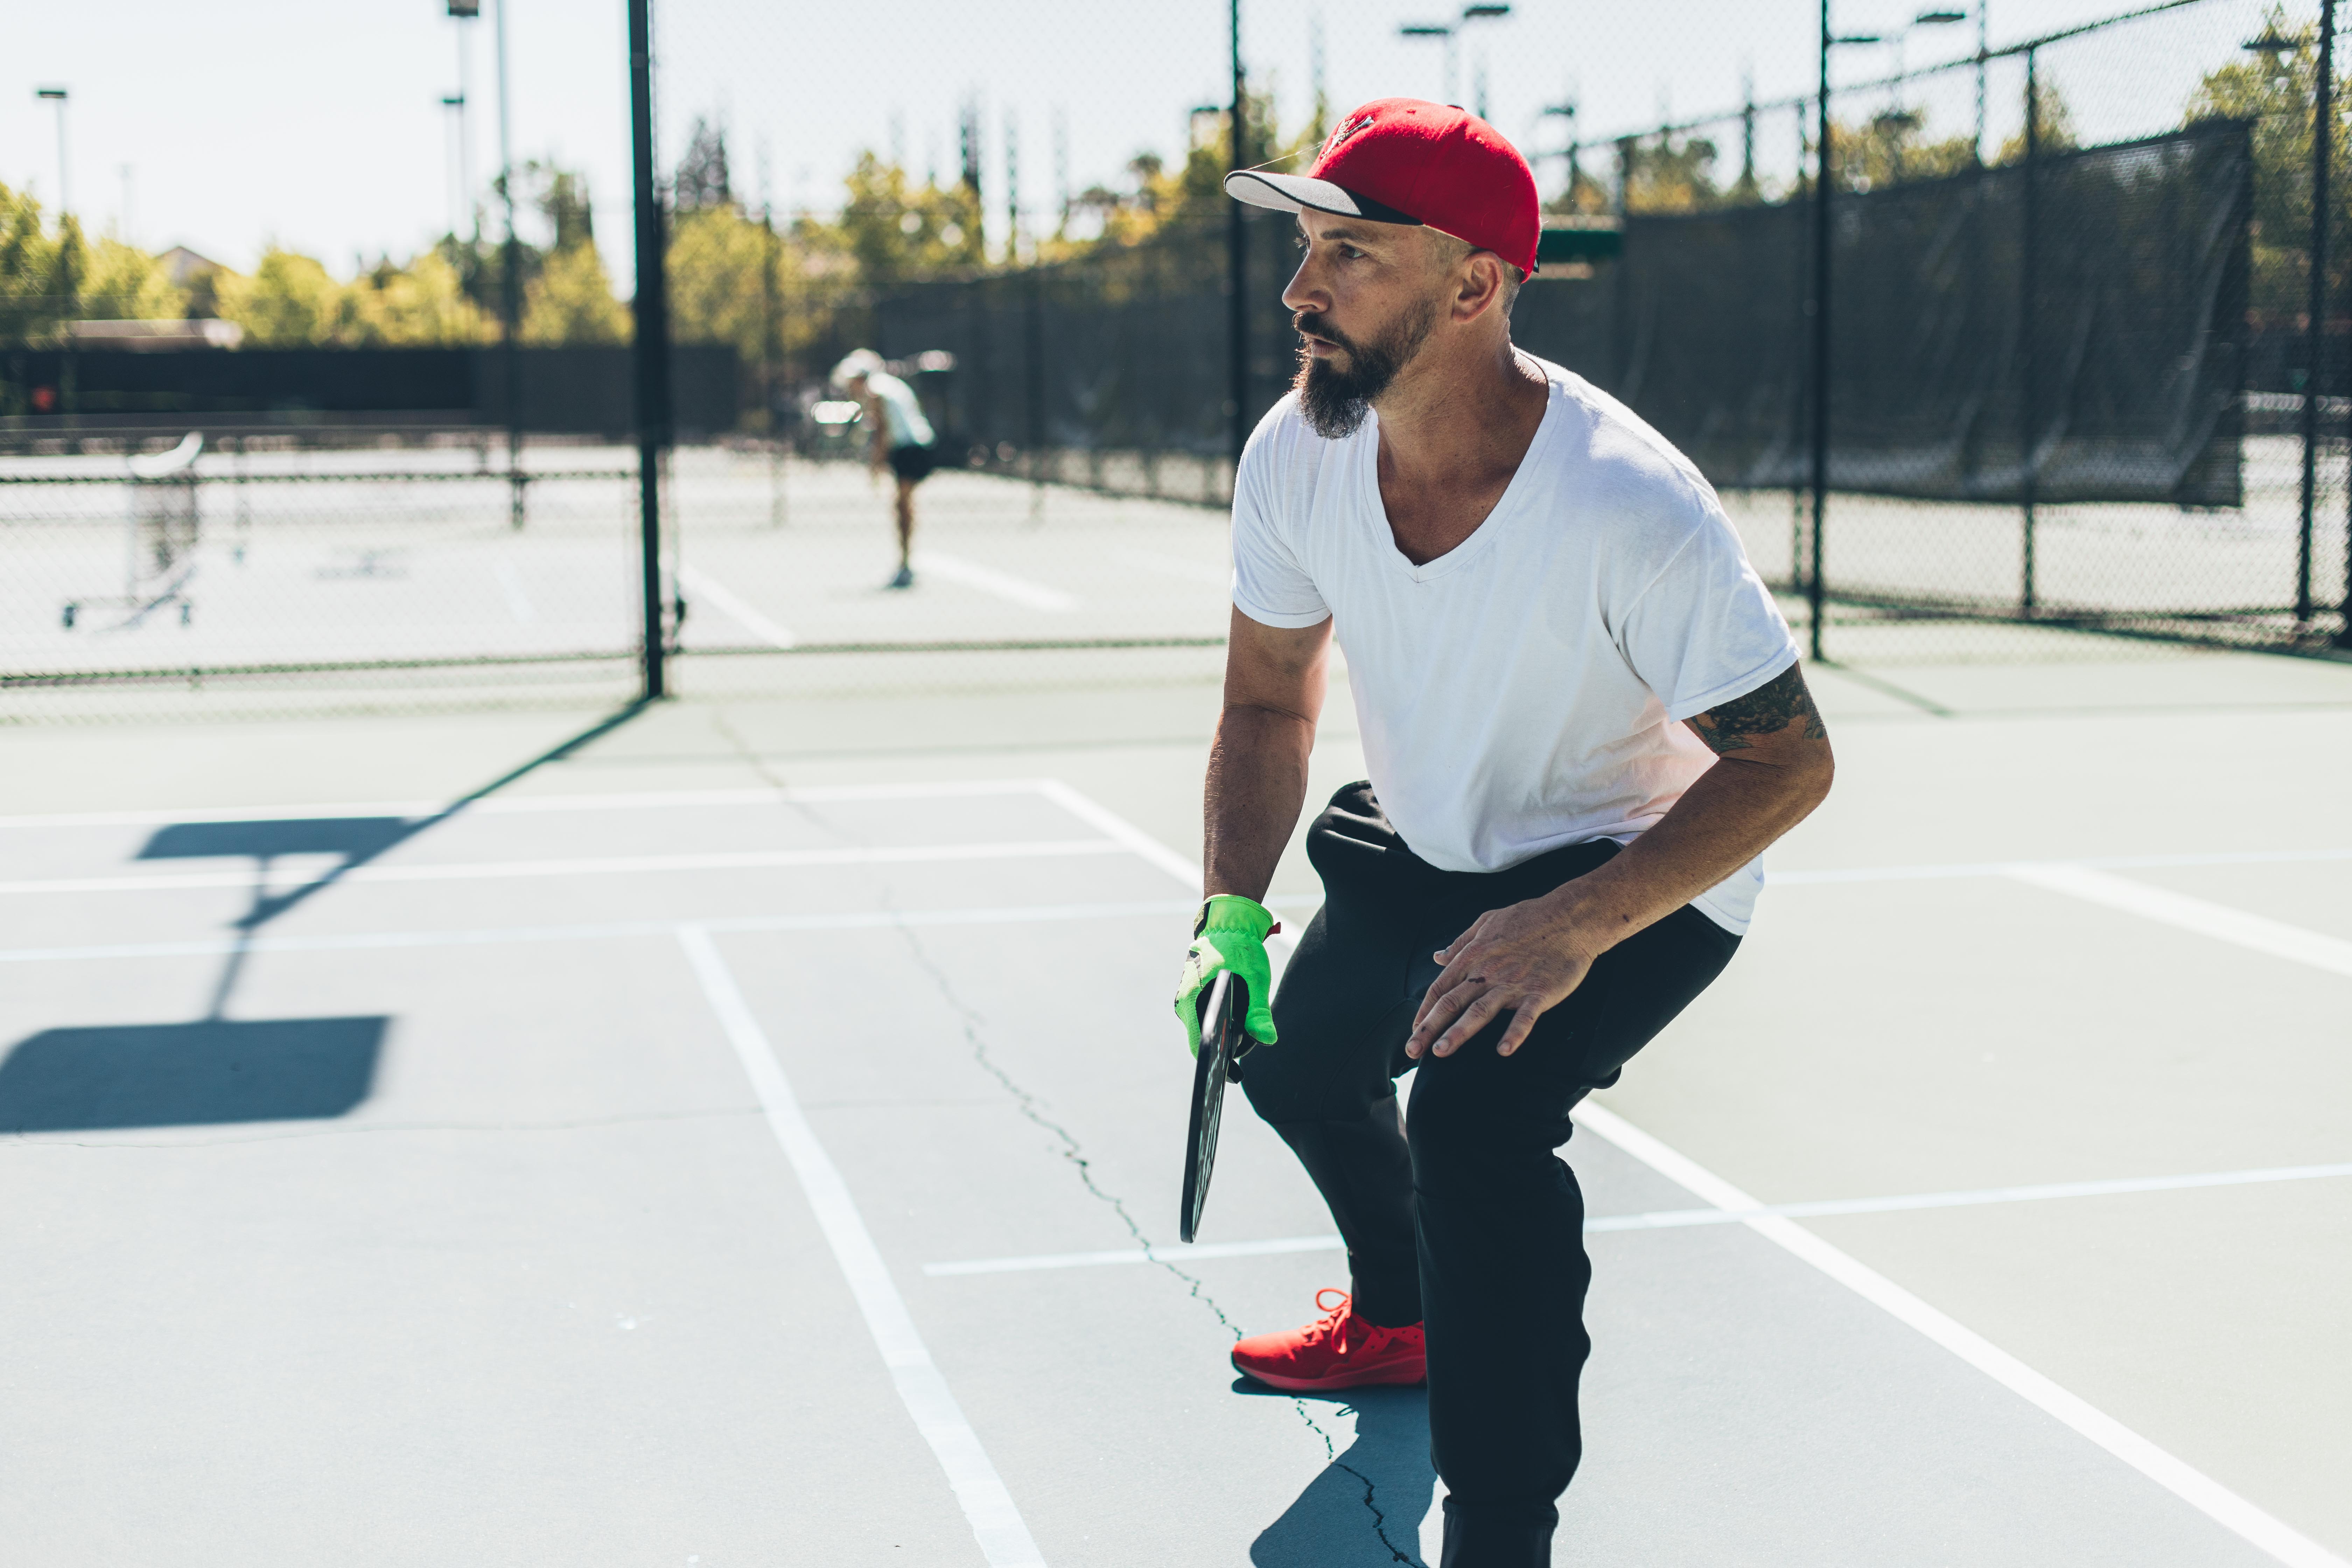 Player enjoying one of the outdoor pickleball courts at In-Shape Health Clubs.